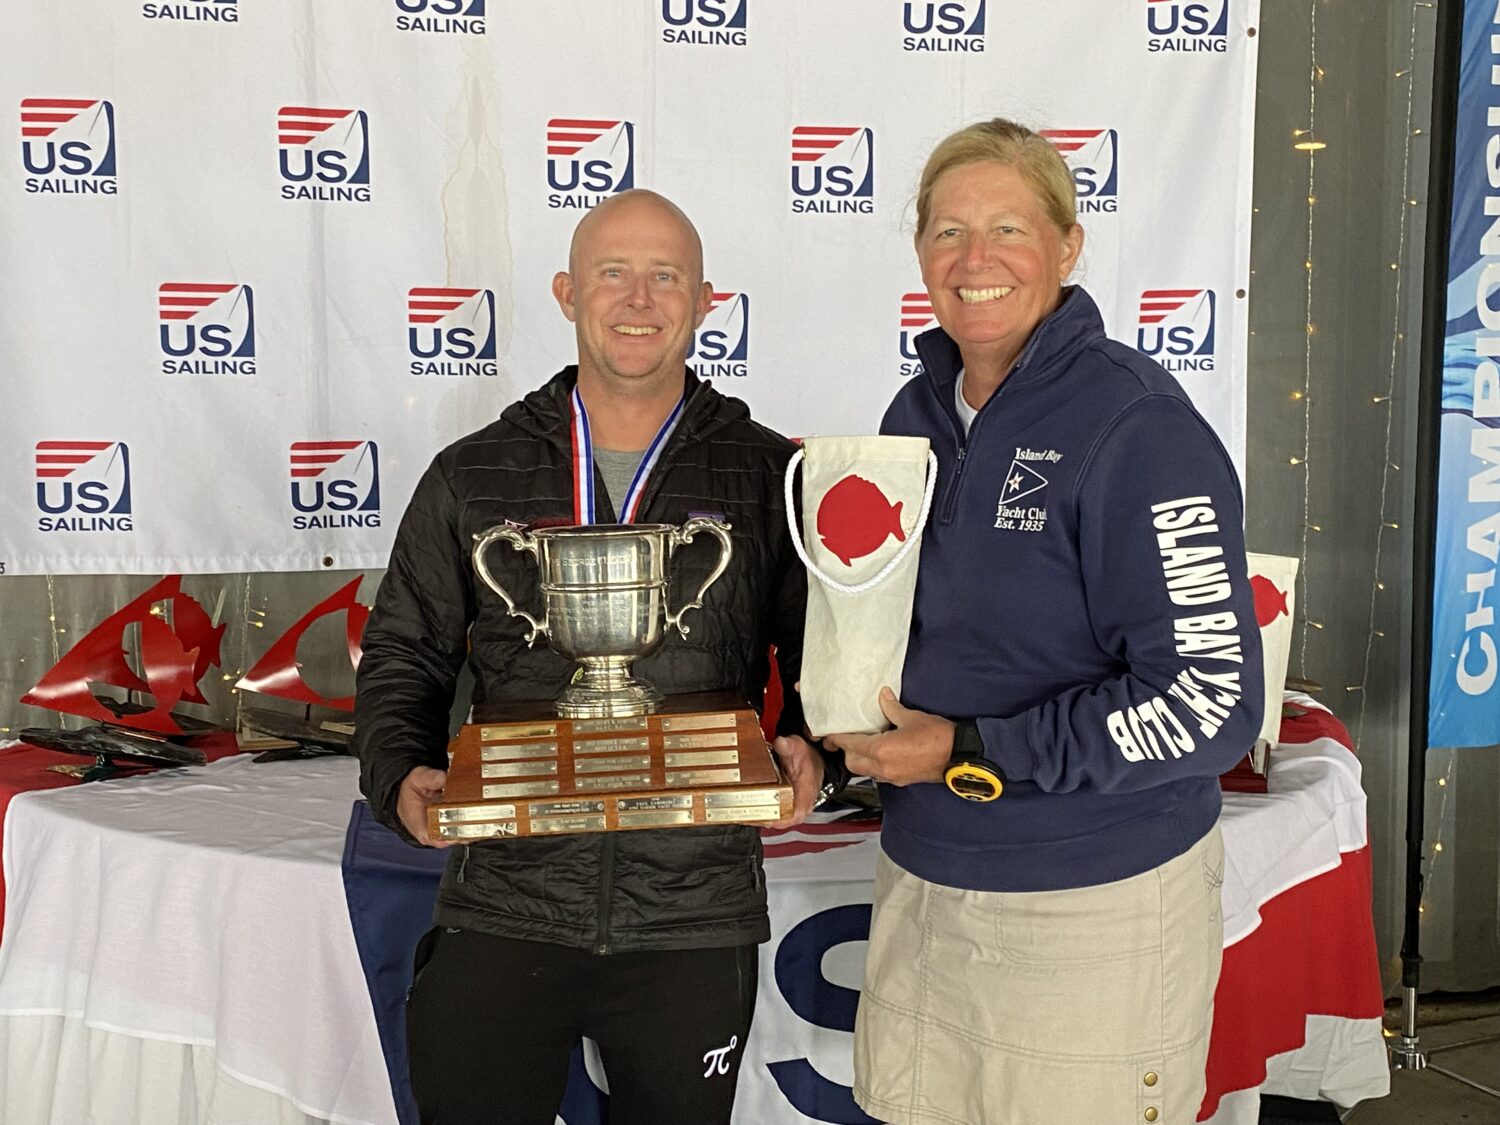 Connor Blouin, winner of the George O'Day Trophy and U.S. Singlehanded Champion, men's division